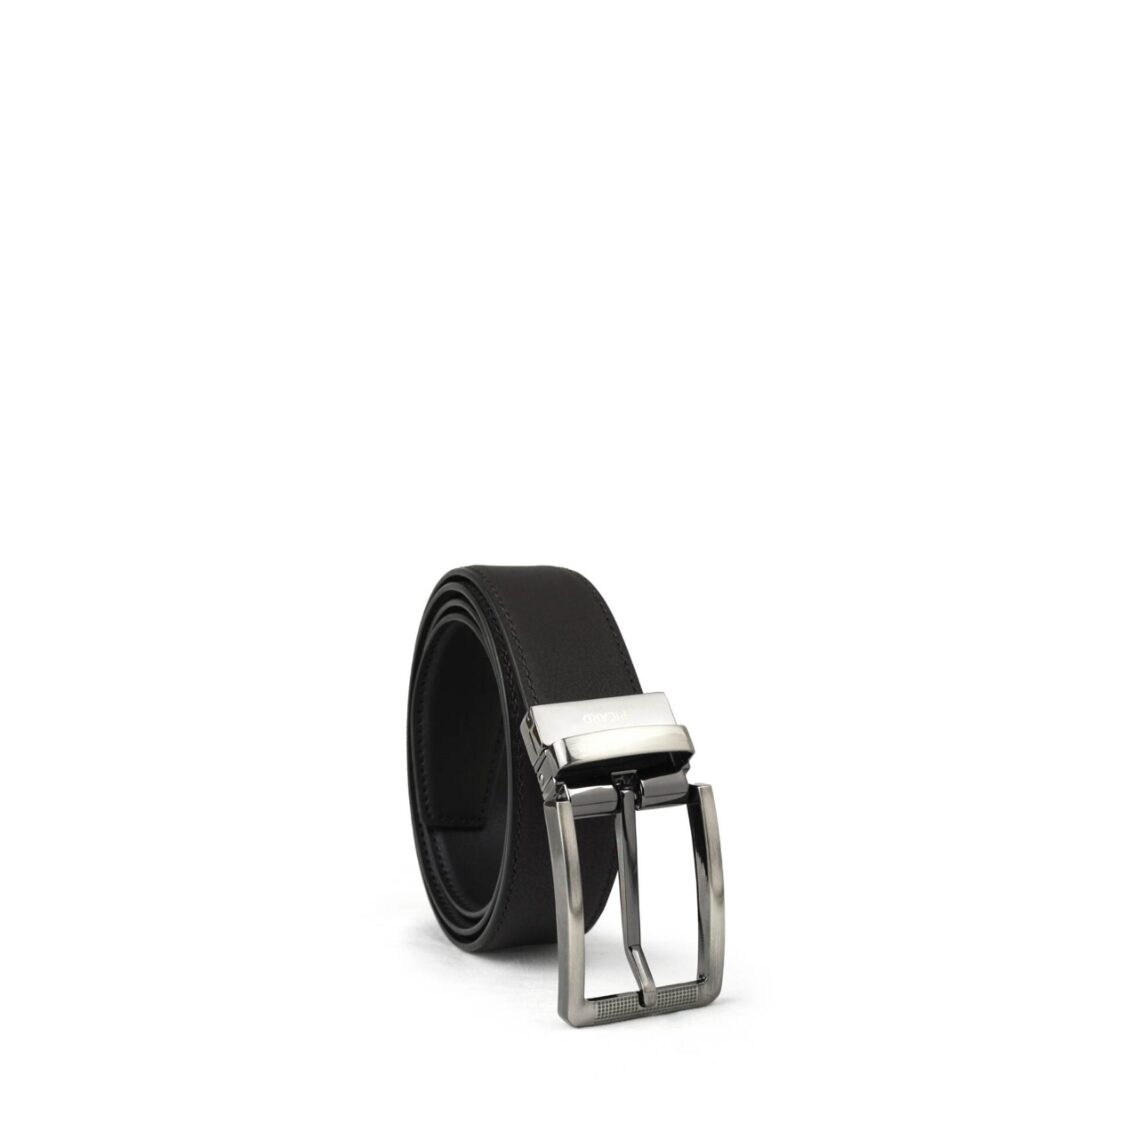 Picard Hanover Auto Lock Leather Belt 35mm120cm Cafe